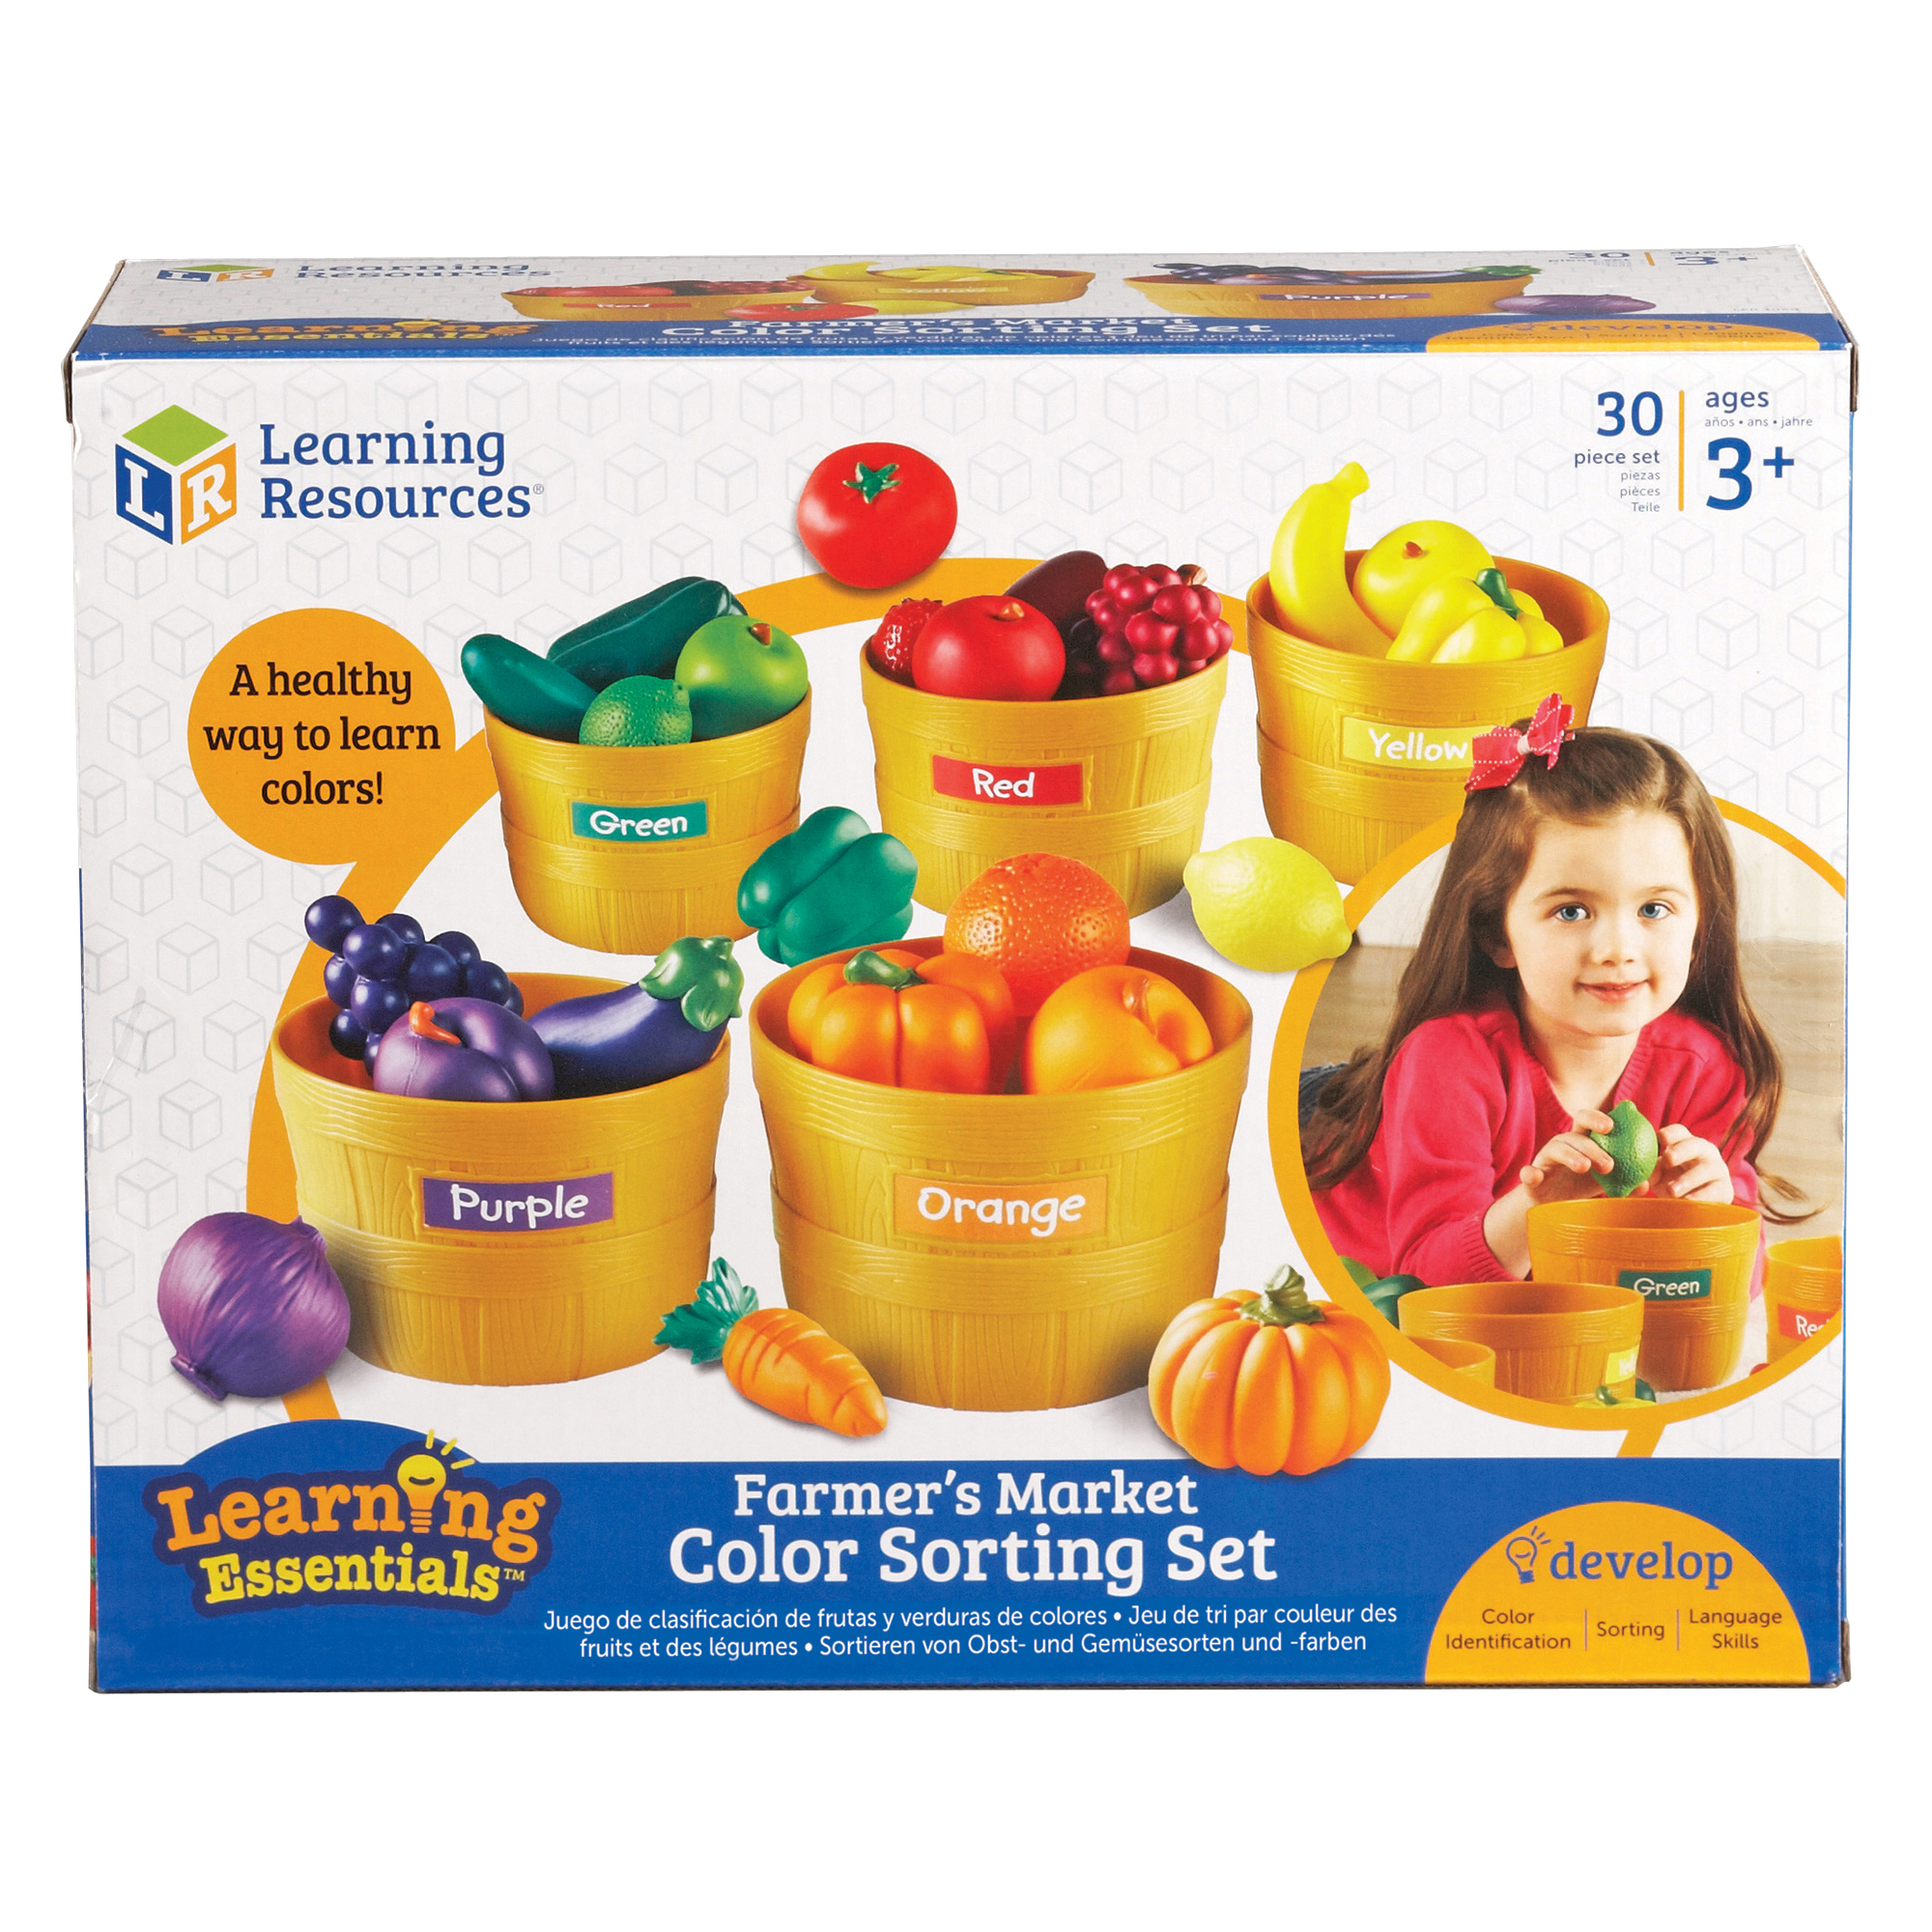 Learning Resources Farmer’s Market Color Sorting Set